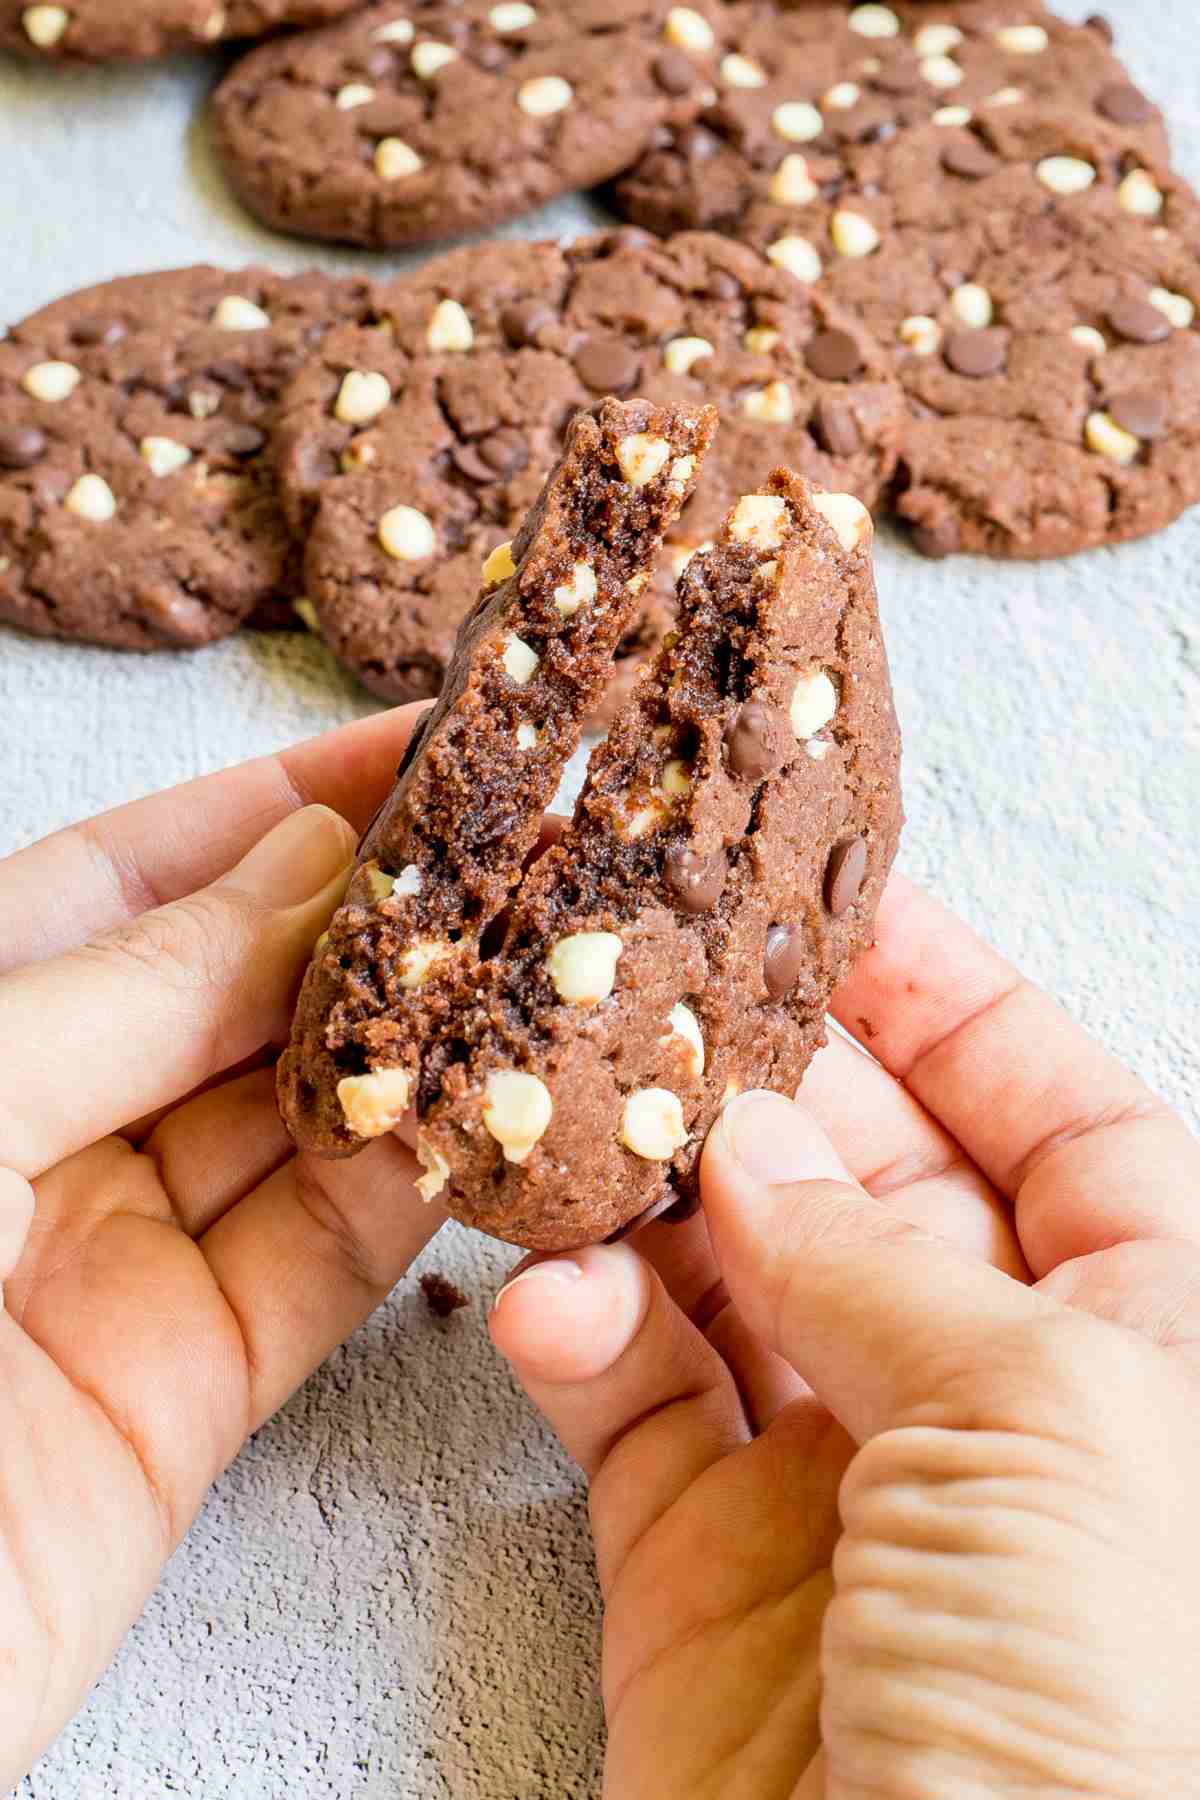 A hand is breaking a dark brown cookie with white and dark chocolate chips in half to show the inner texture. More cookies are behind it.